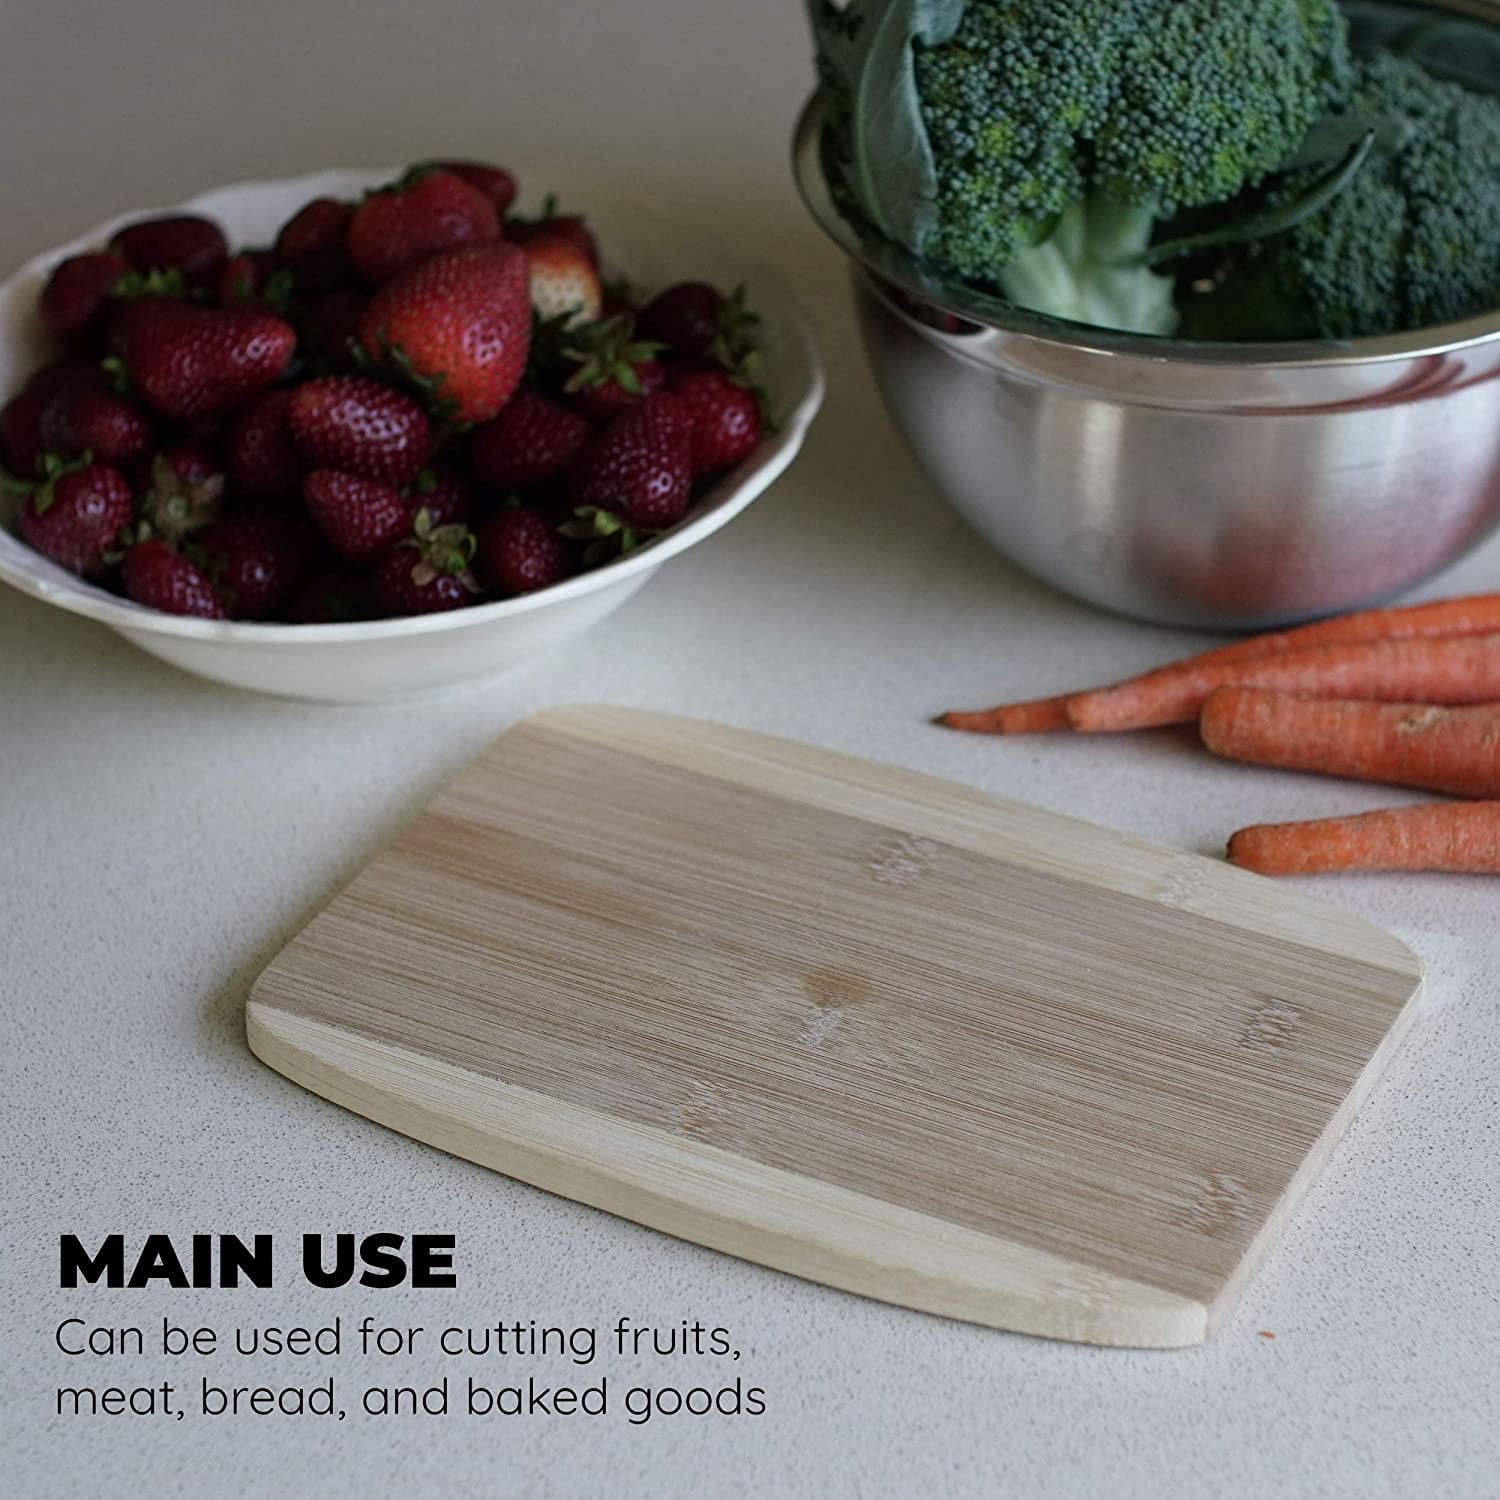  Brite Concepts Mini Bamboo Cutting Board, 6 by 9 Inches (Pack  of 1): Home & Kitchen